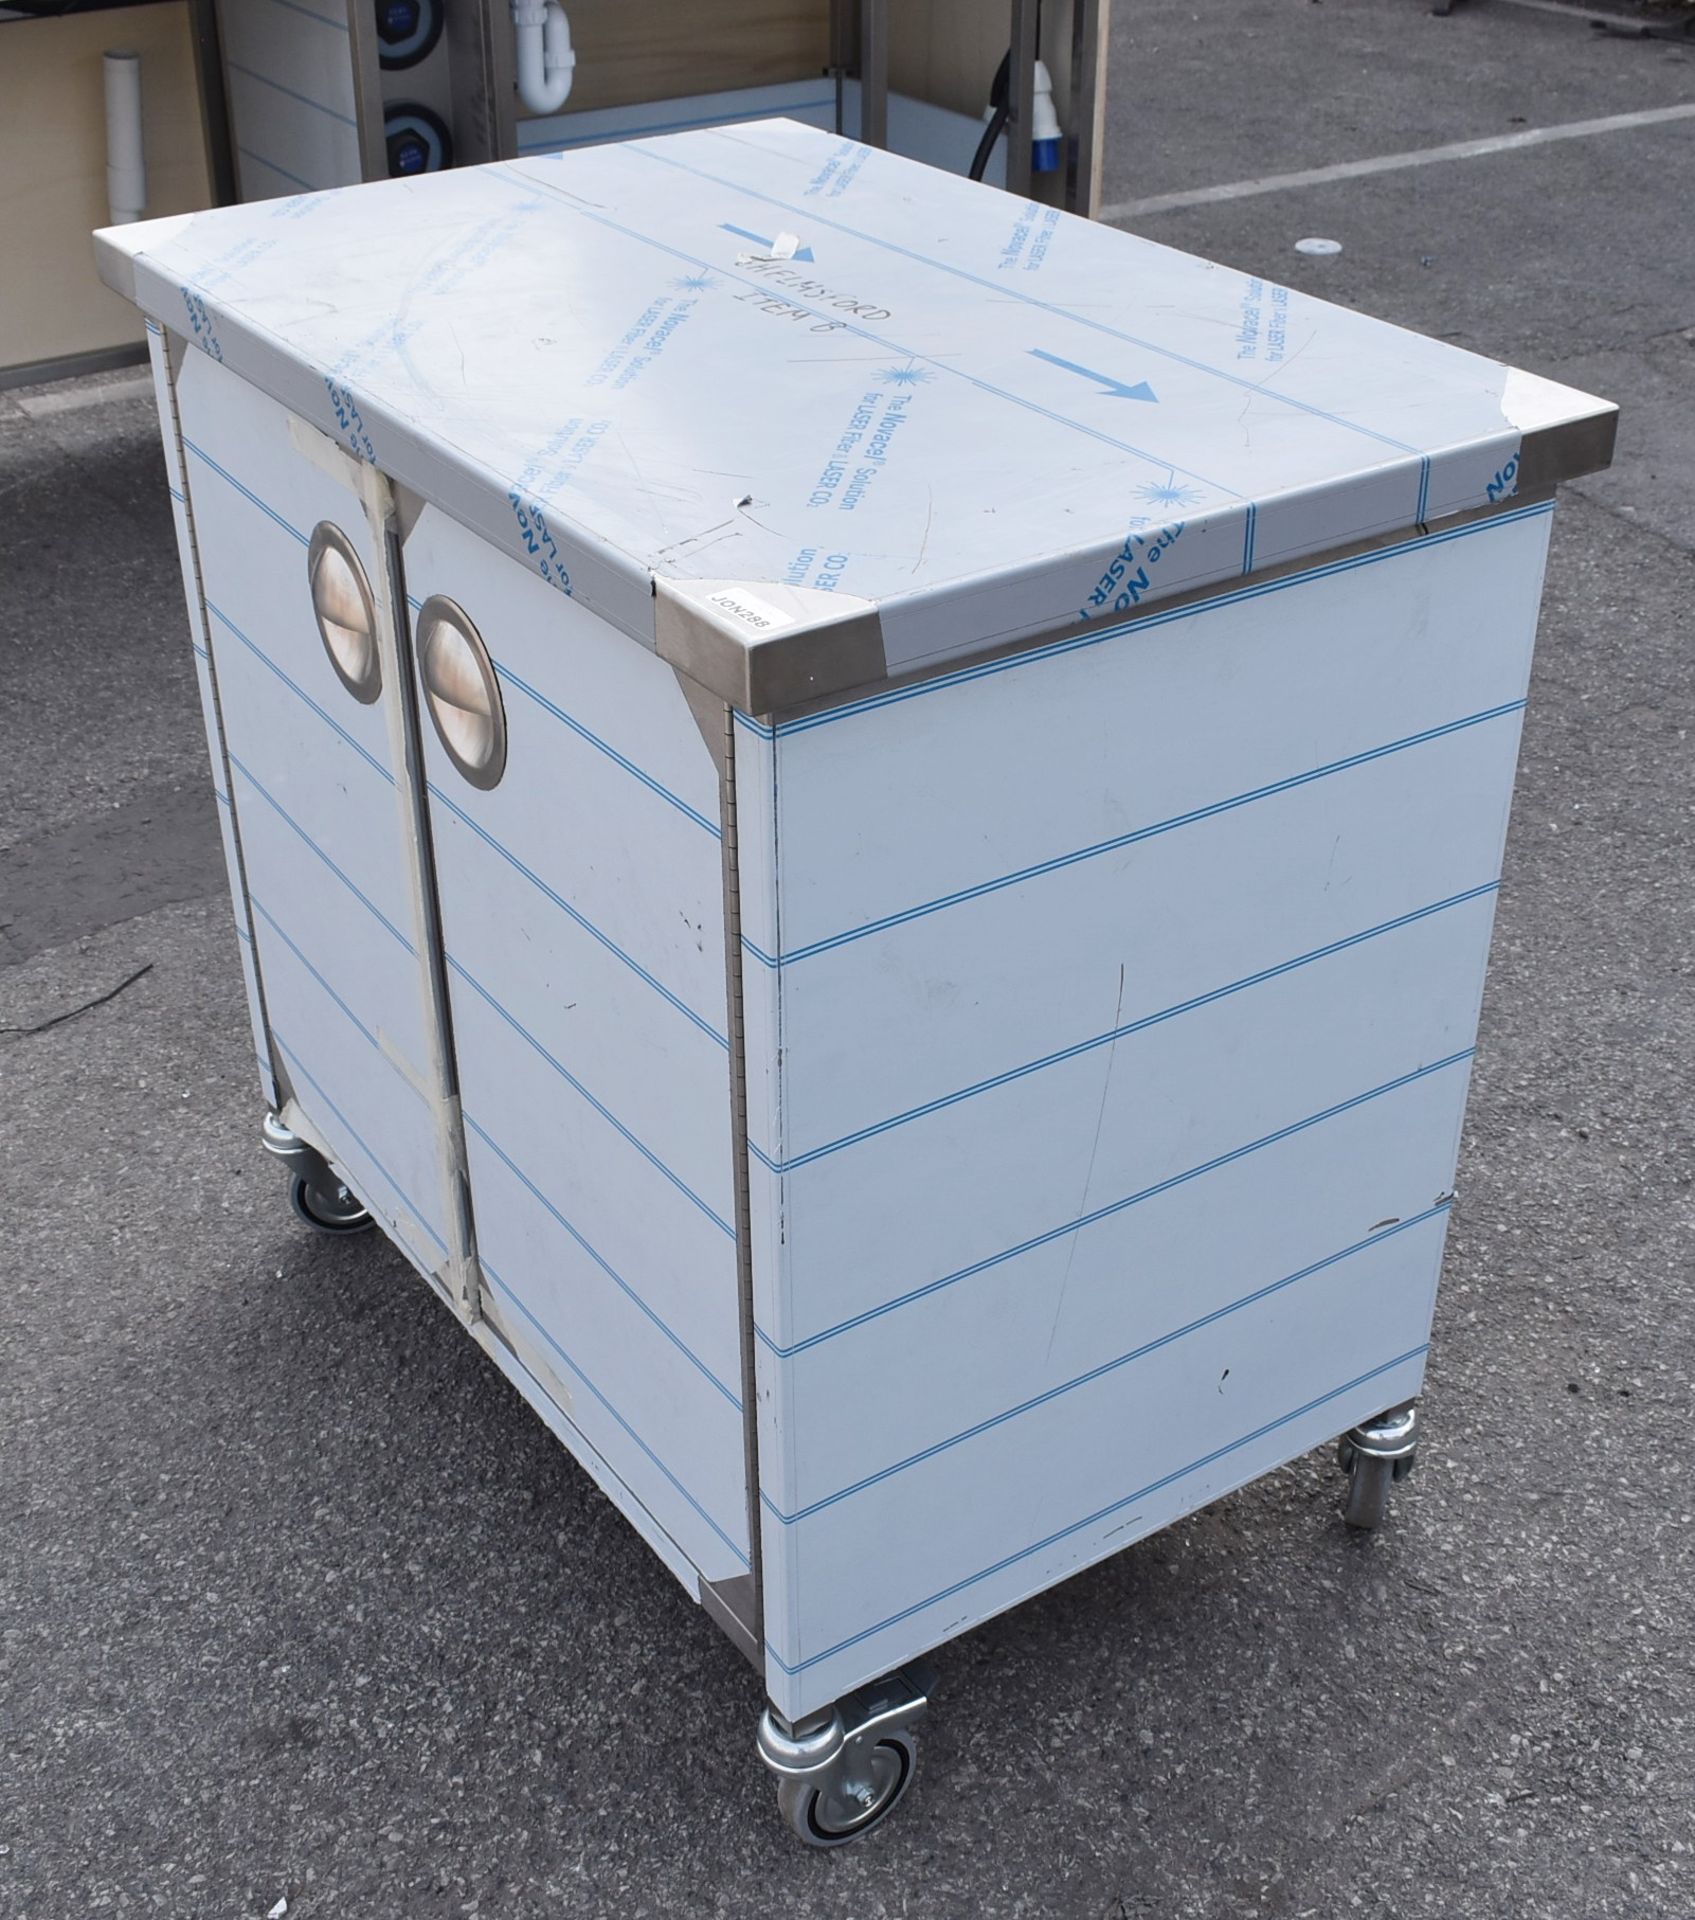 1 x Stainless Steel Mobile Prep Cabinet - New and Unused - Dimensions: H91 x W90 x D60 cms - - Image 6 of 7